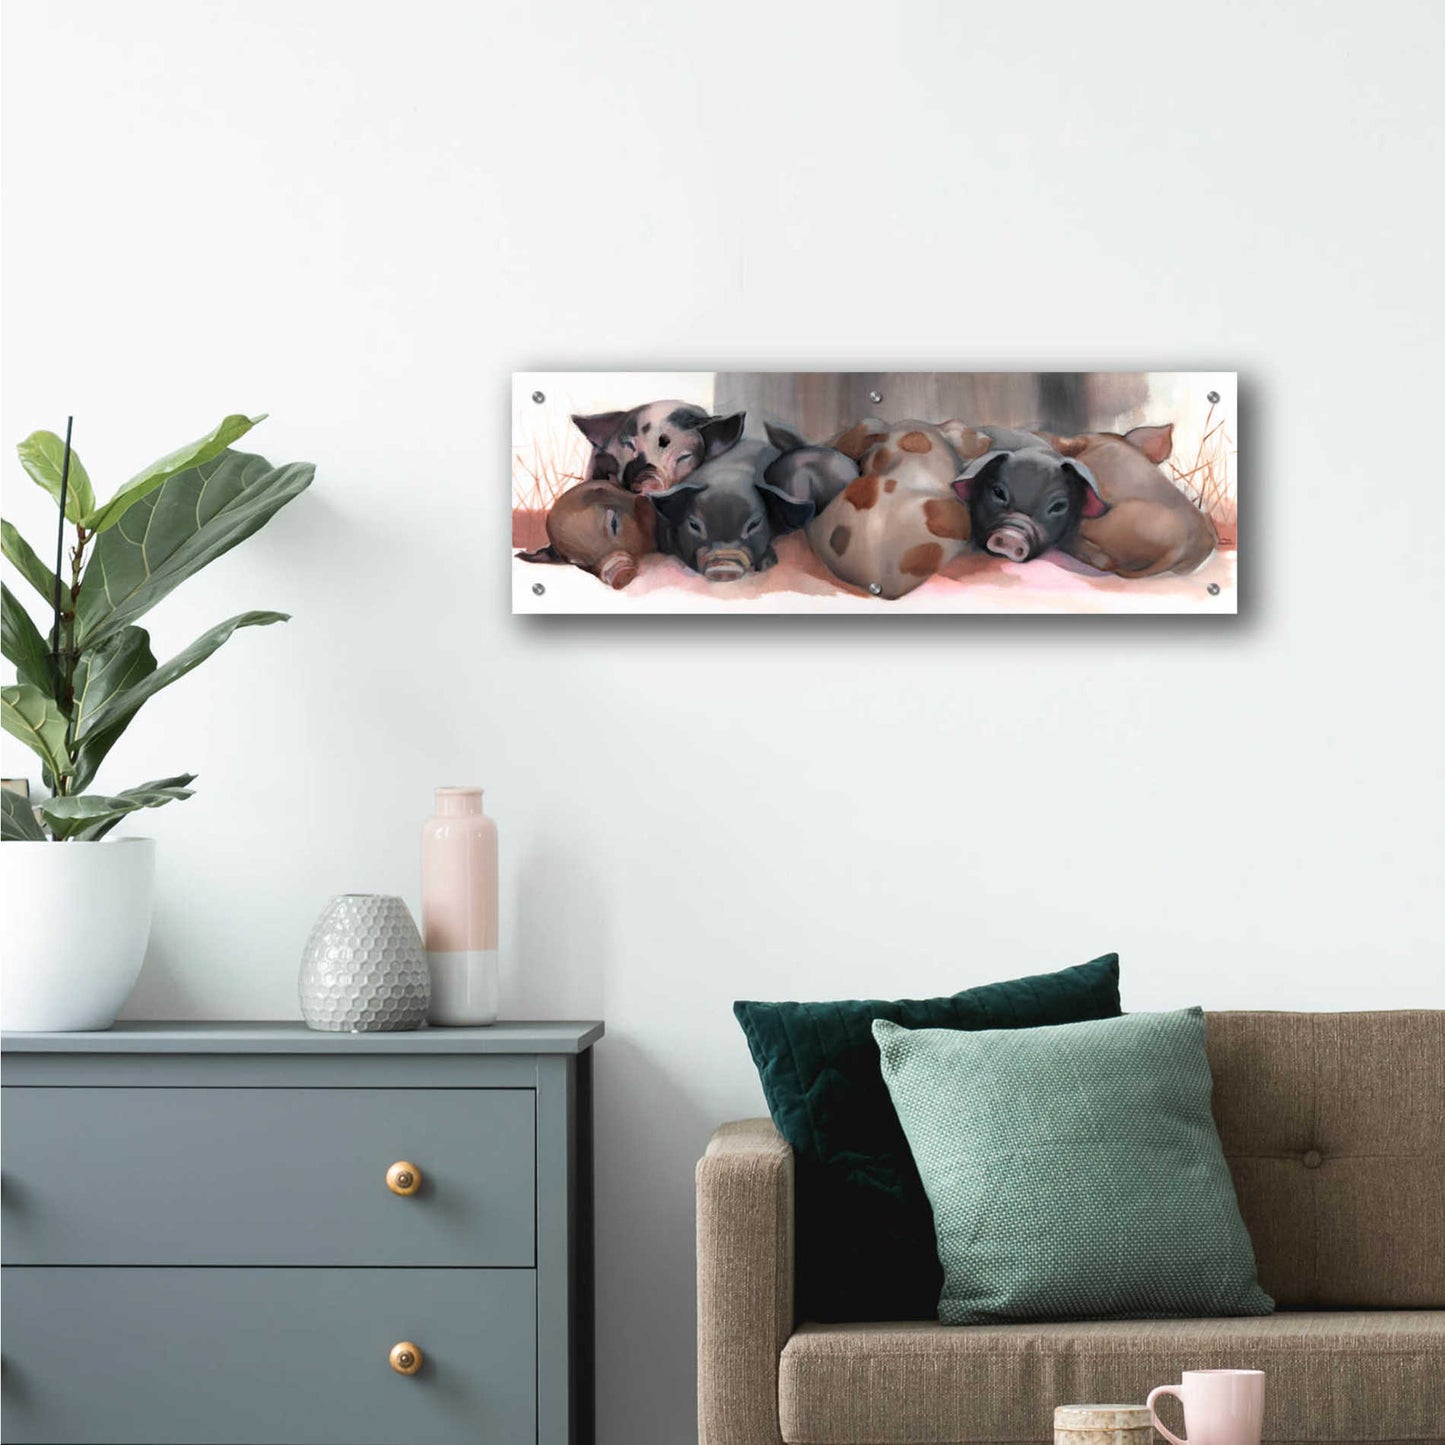 Epic Art 'Pig Pile' by Louise Montillio Acrylic Glass Wall Art,36x12